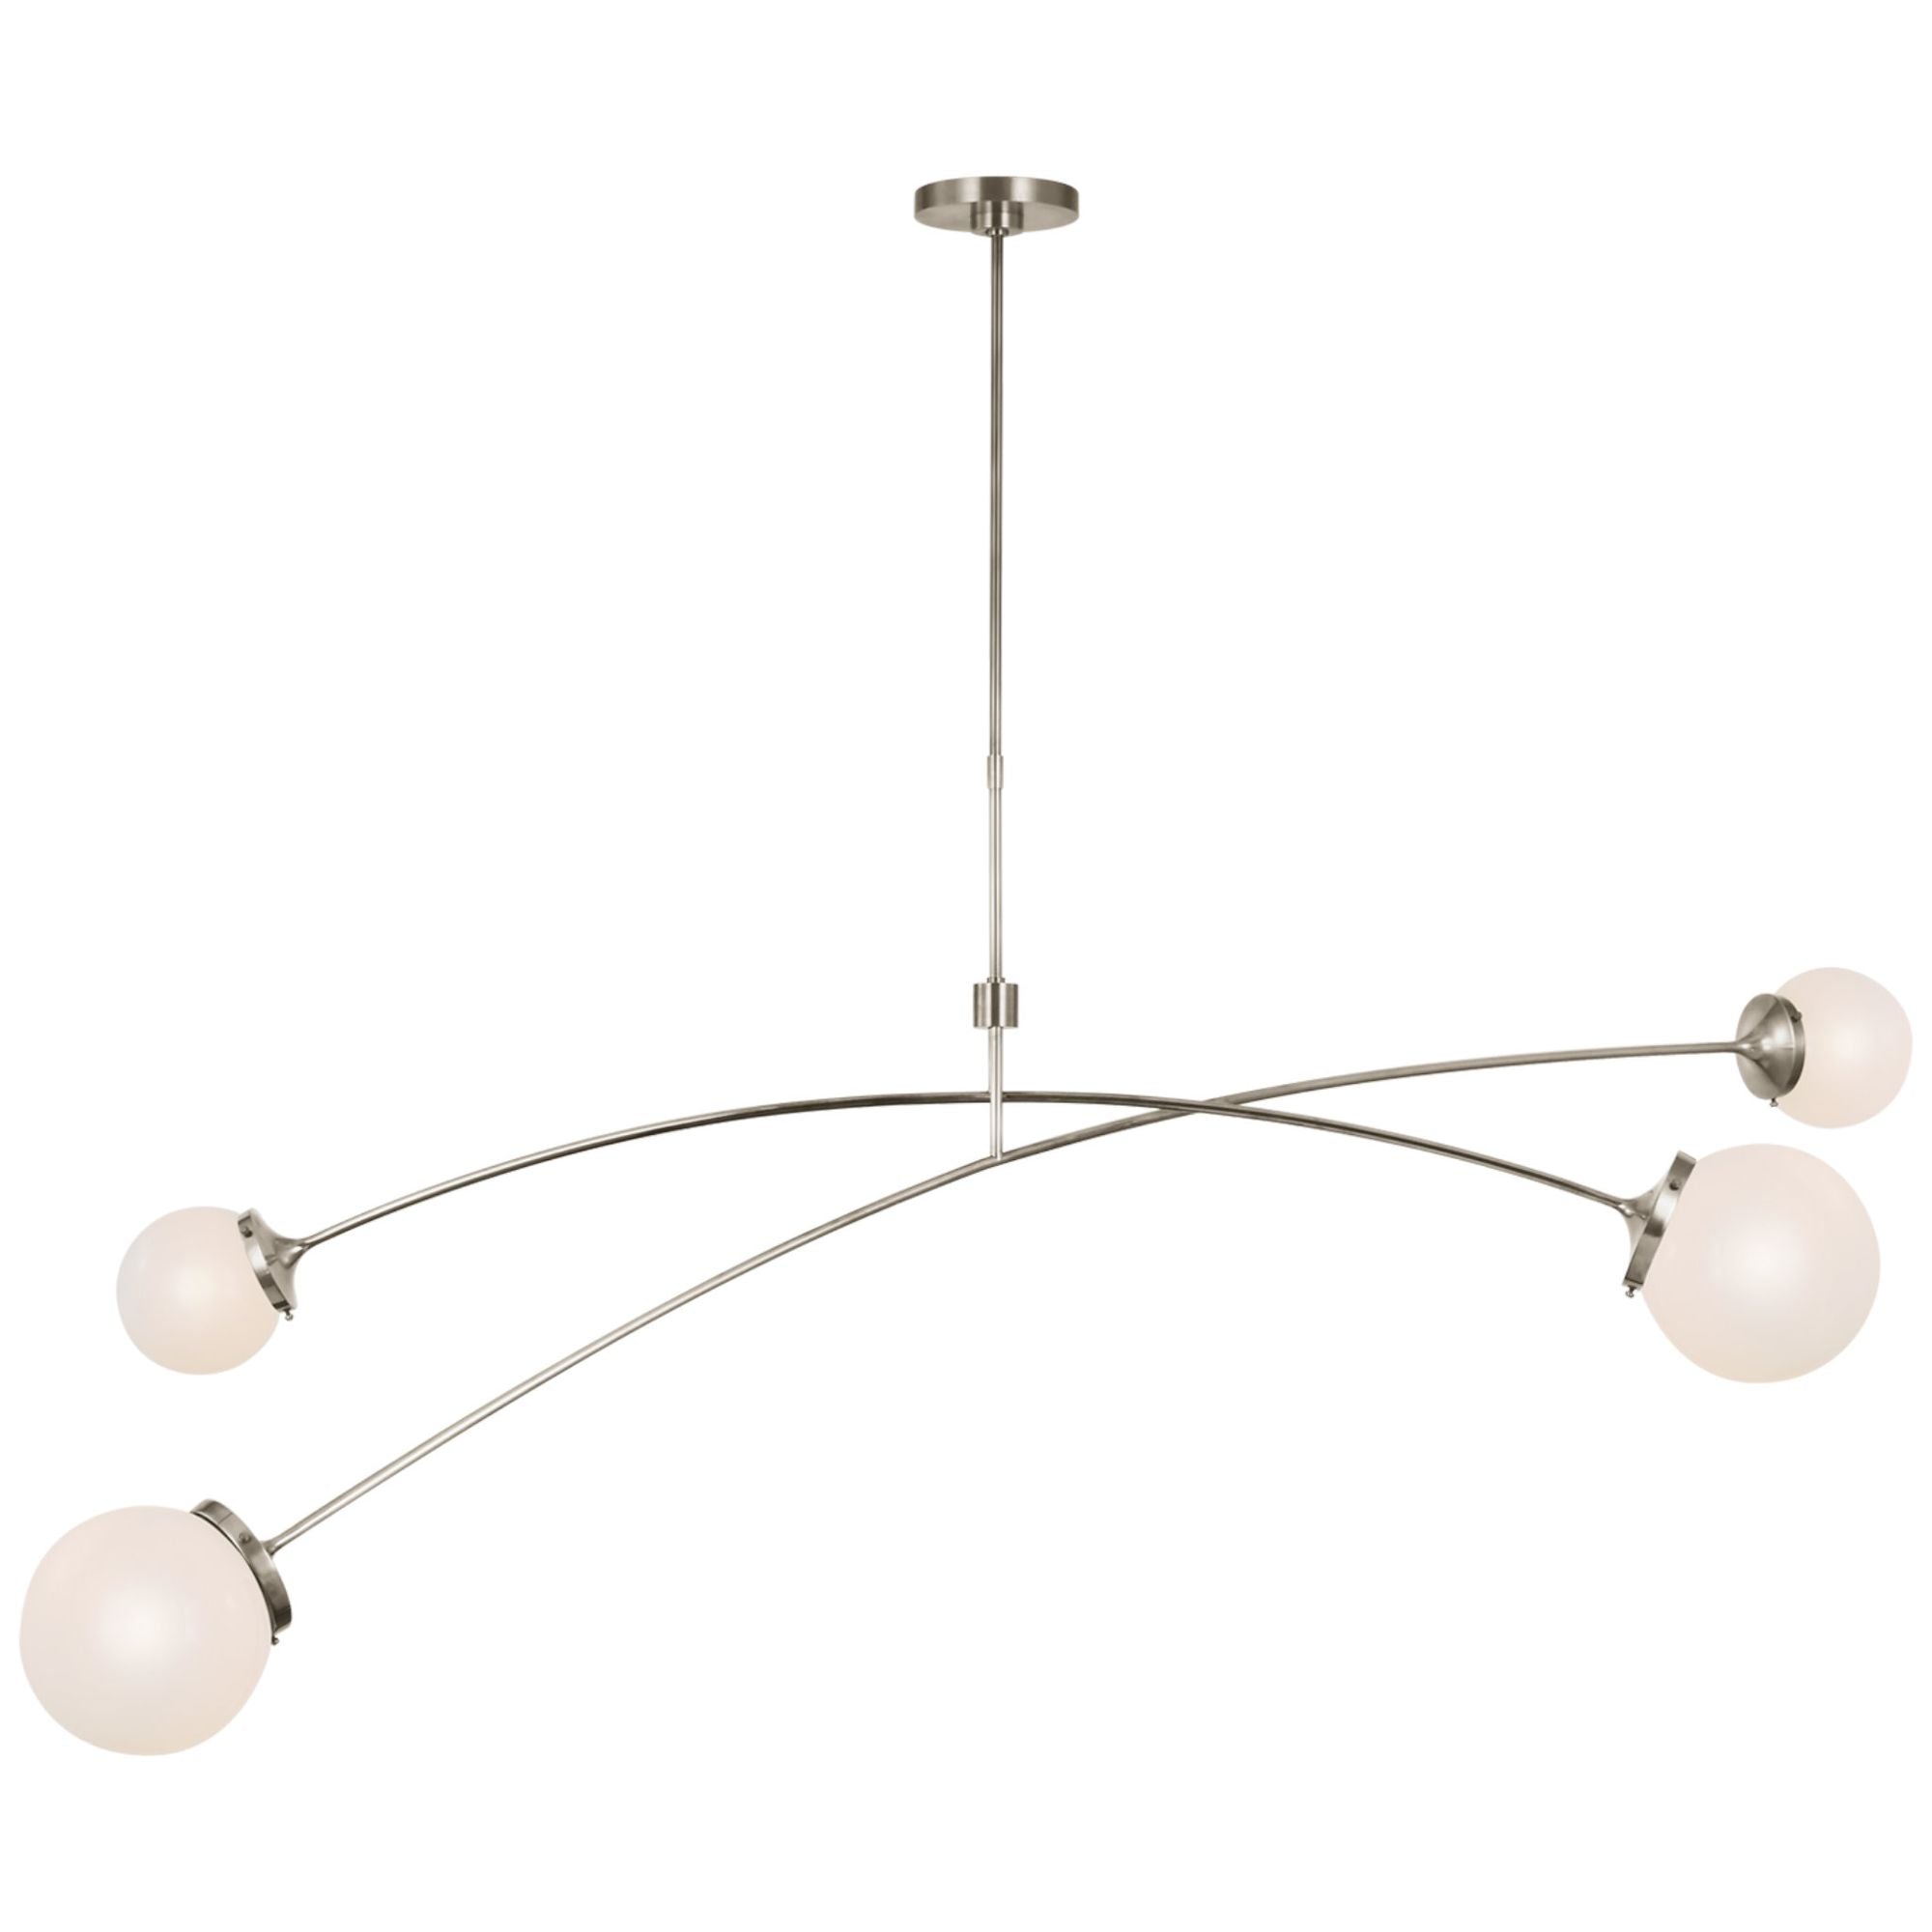 kate spade new york Prescott 69" Linear Chandelier in Polished Nickel with White Glass